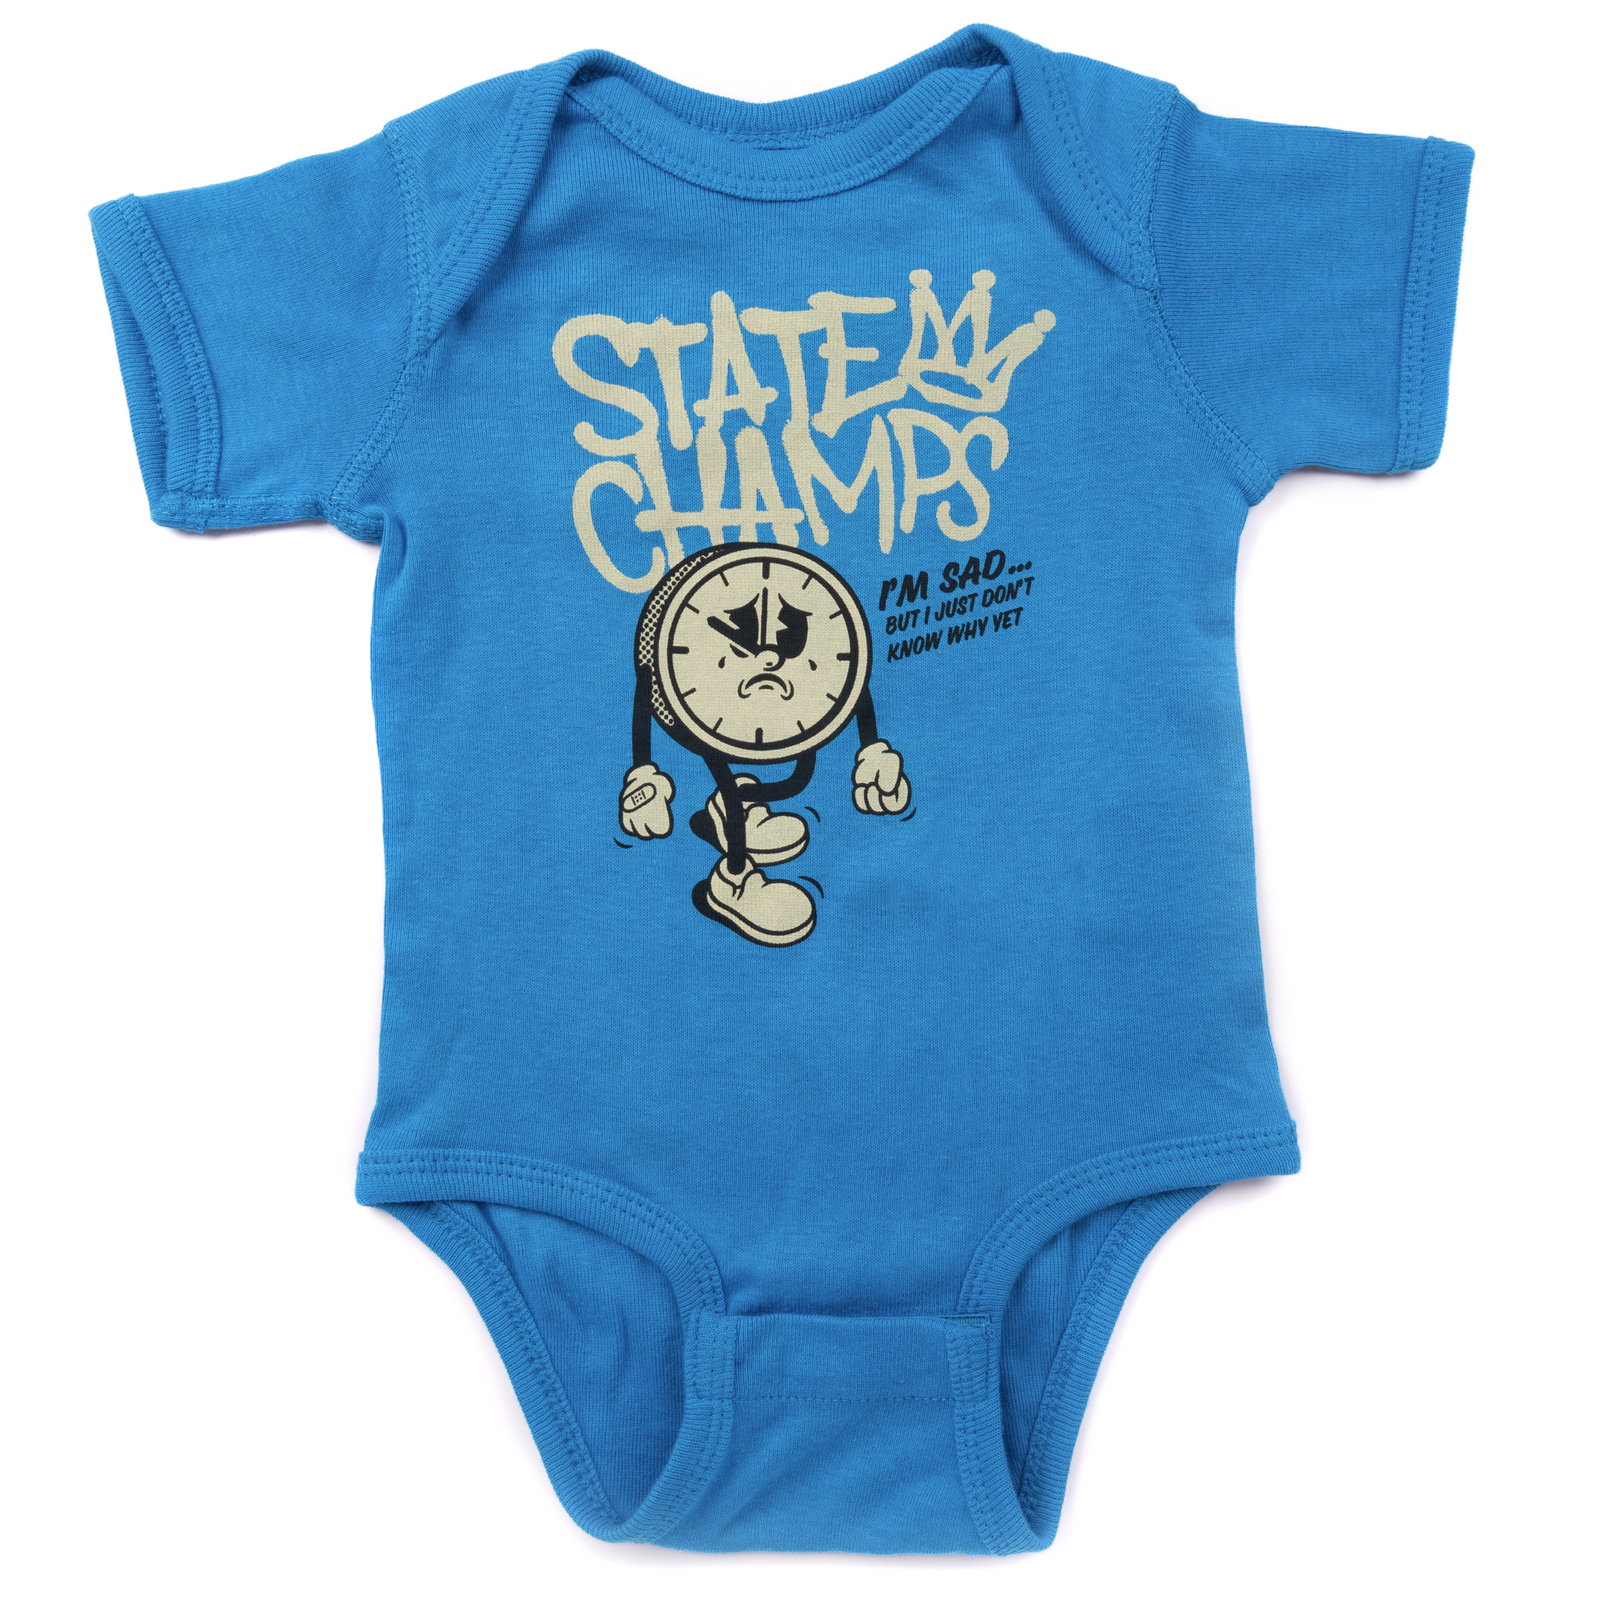 State Champs Onesie